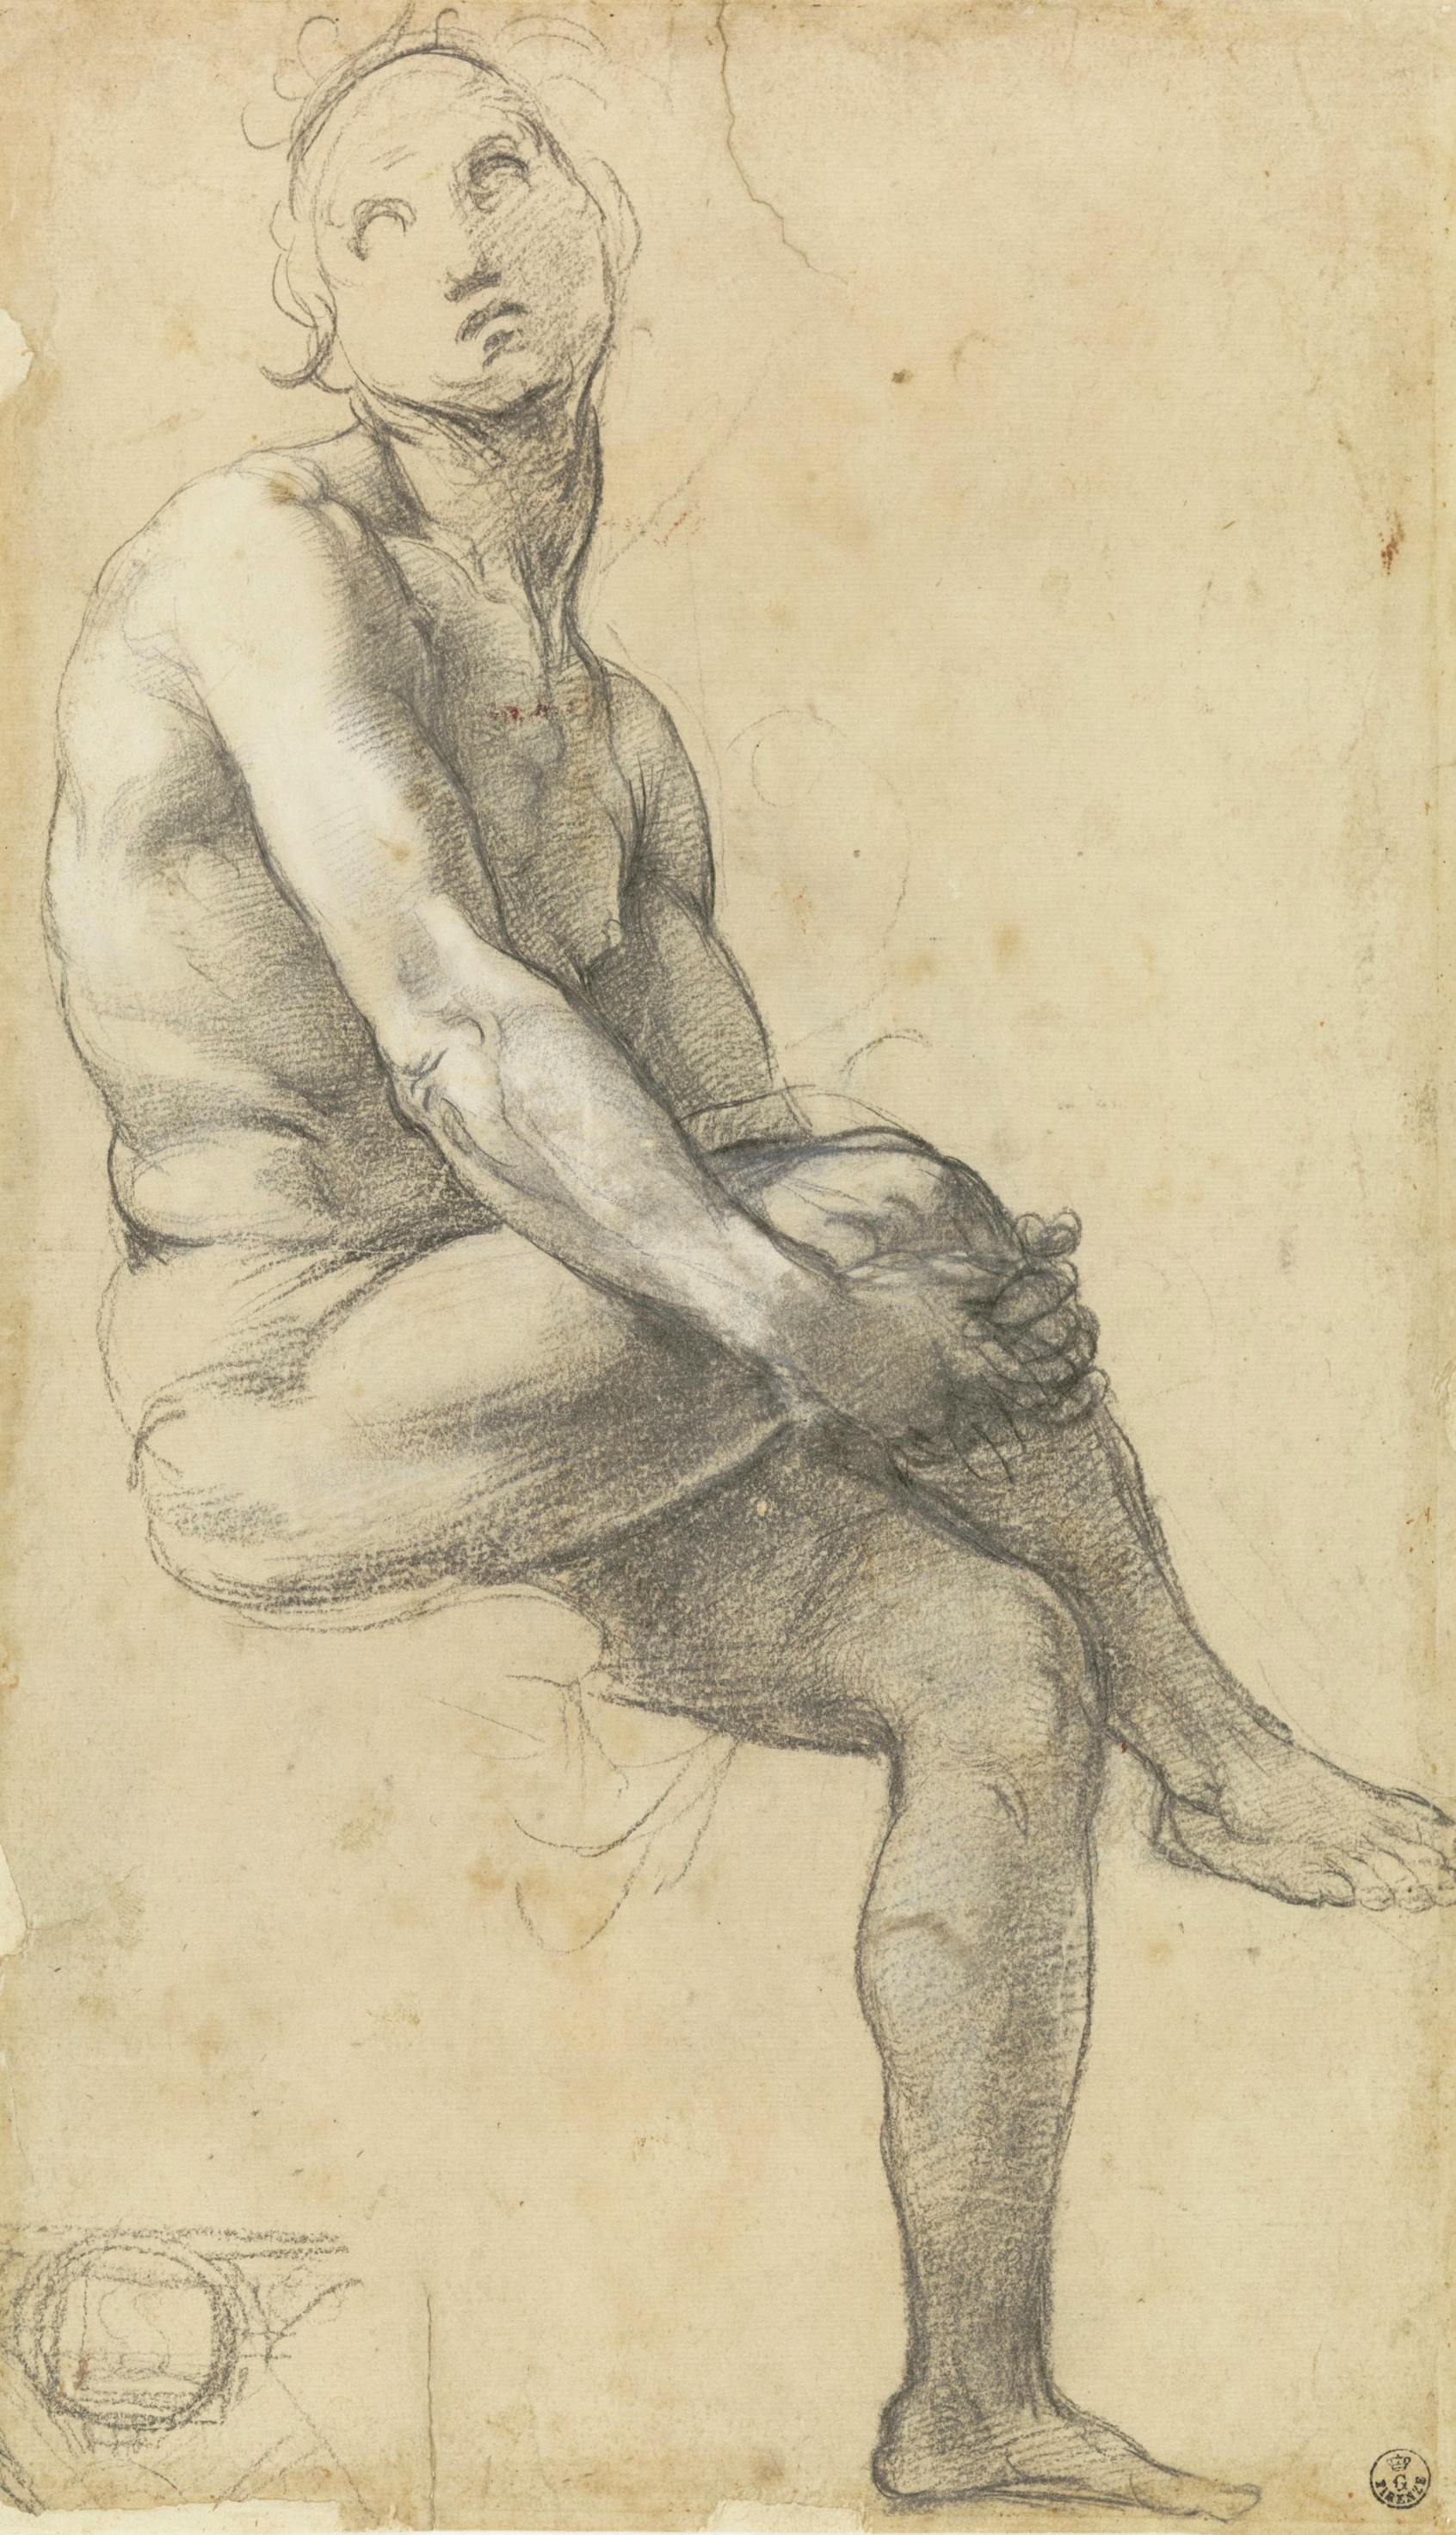 Preparatory study for Adam in “Disputation of the Holy Sacrament”, architectural sketch